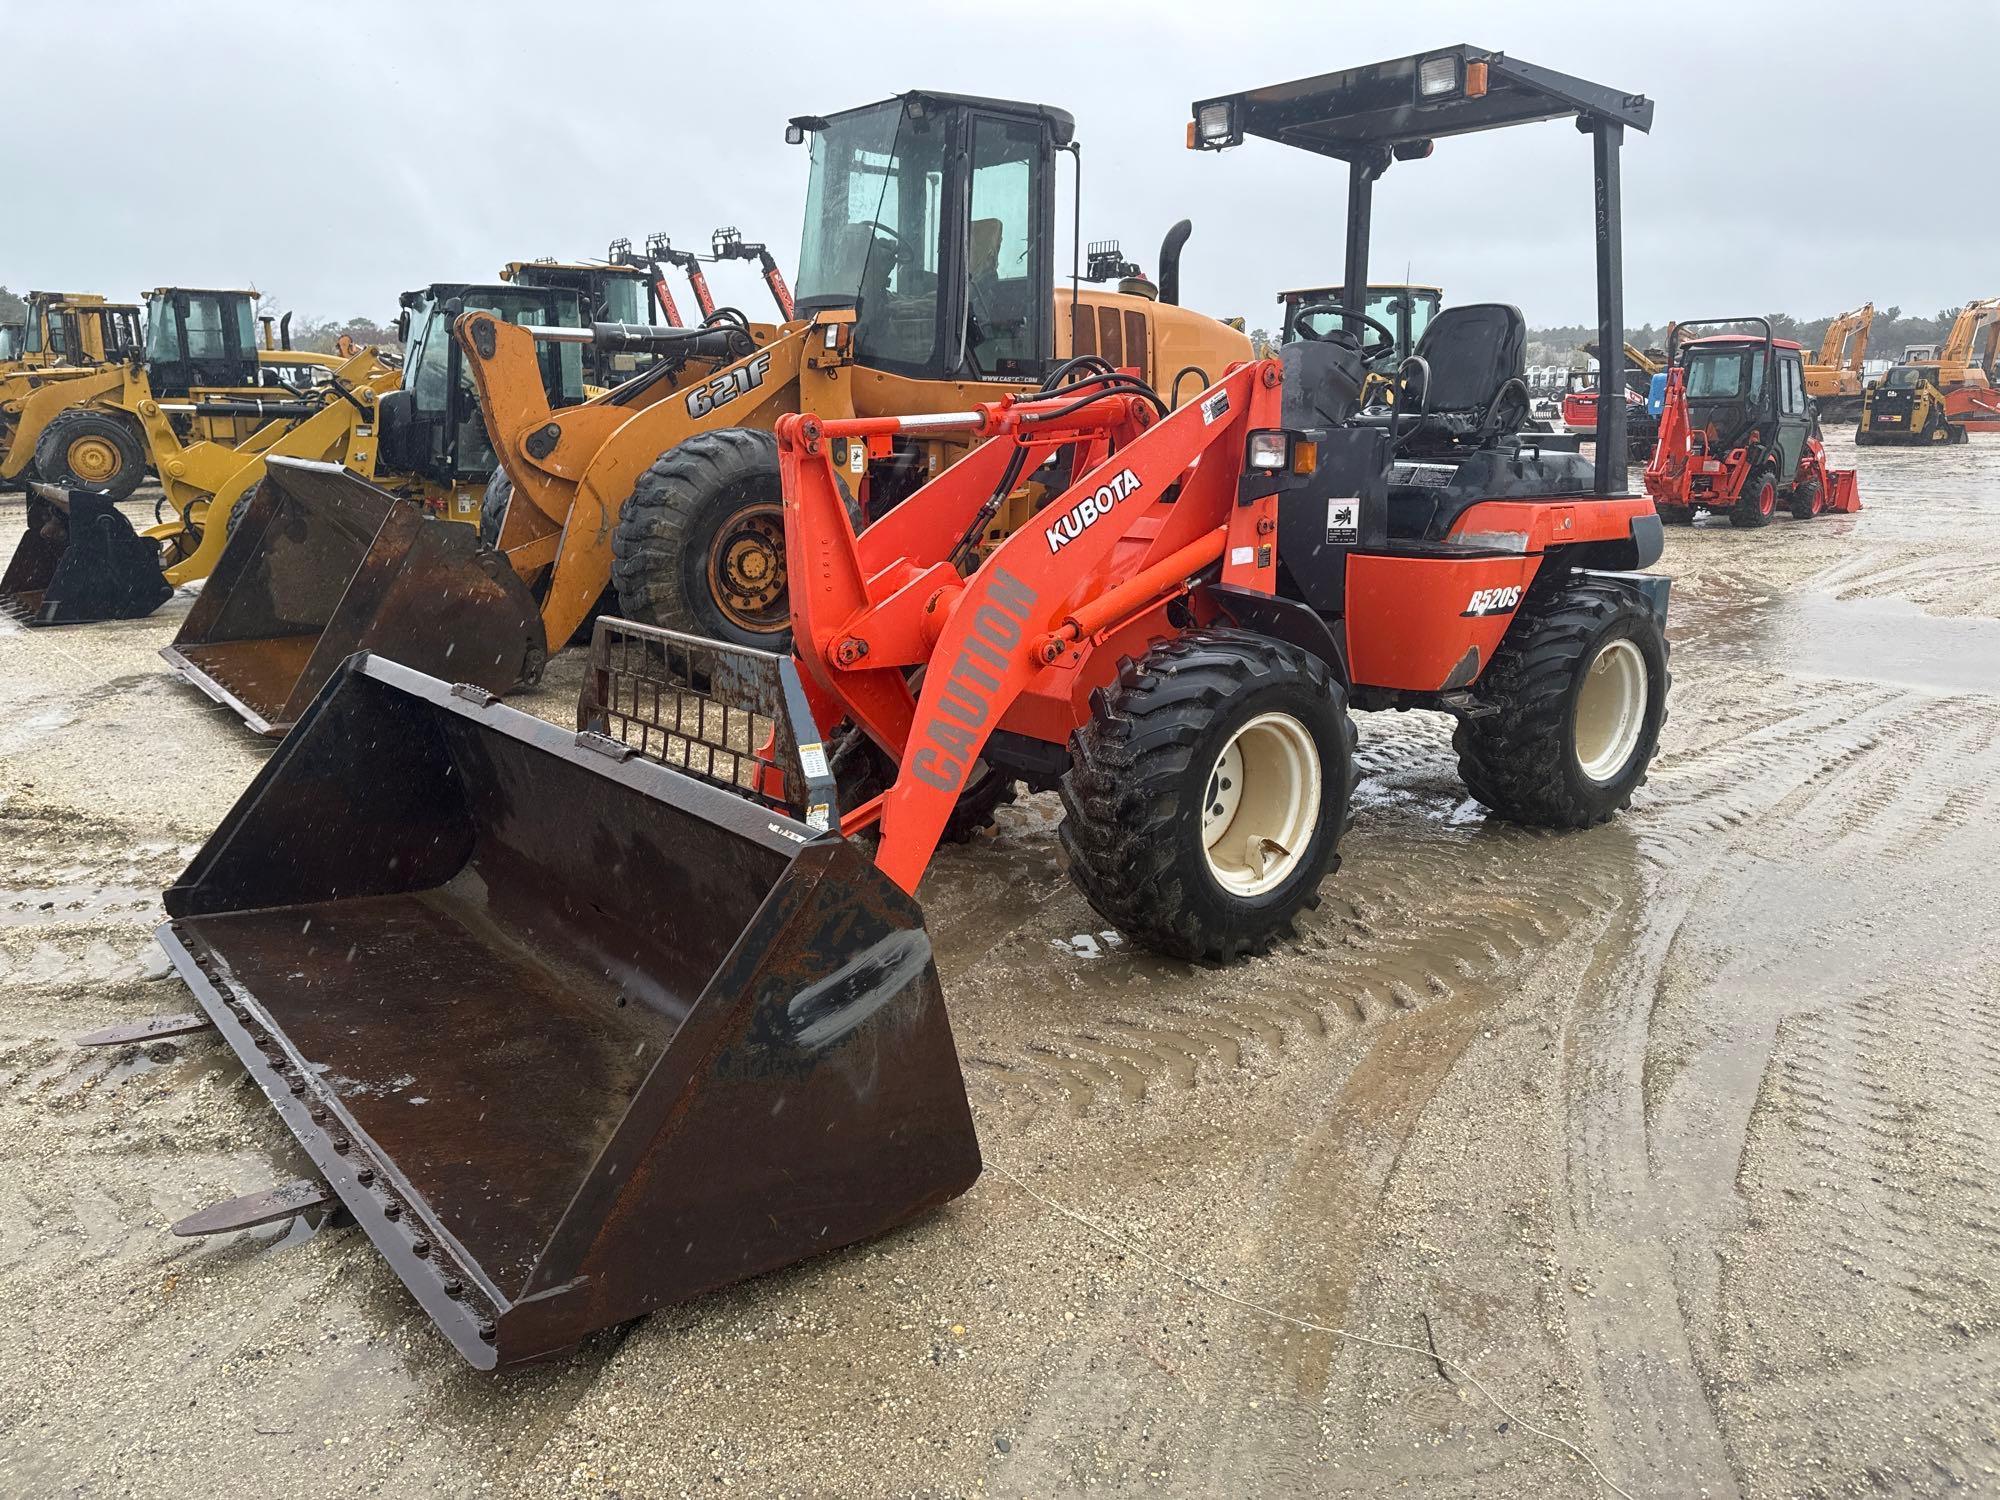 2010 KUBOTA R520S RUBBER TIRED LOADER SN:11076 powered by Kubota diesel engine, equipped with OROPS,